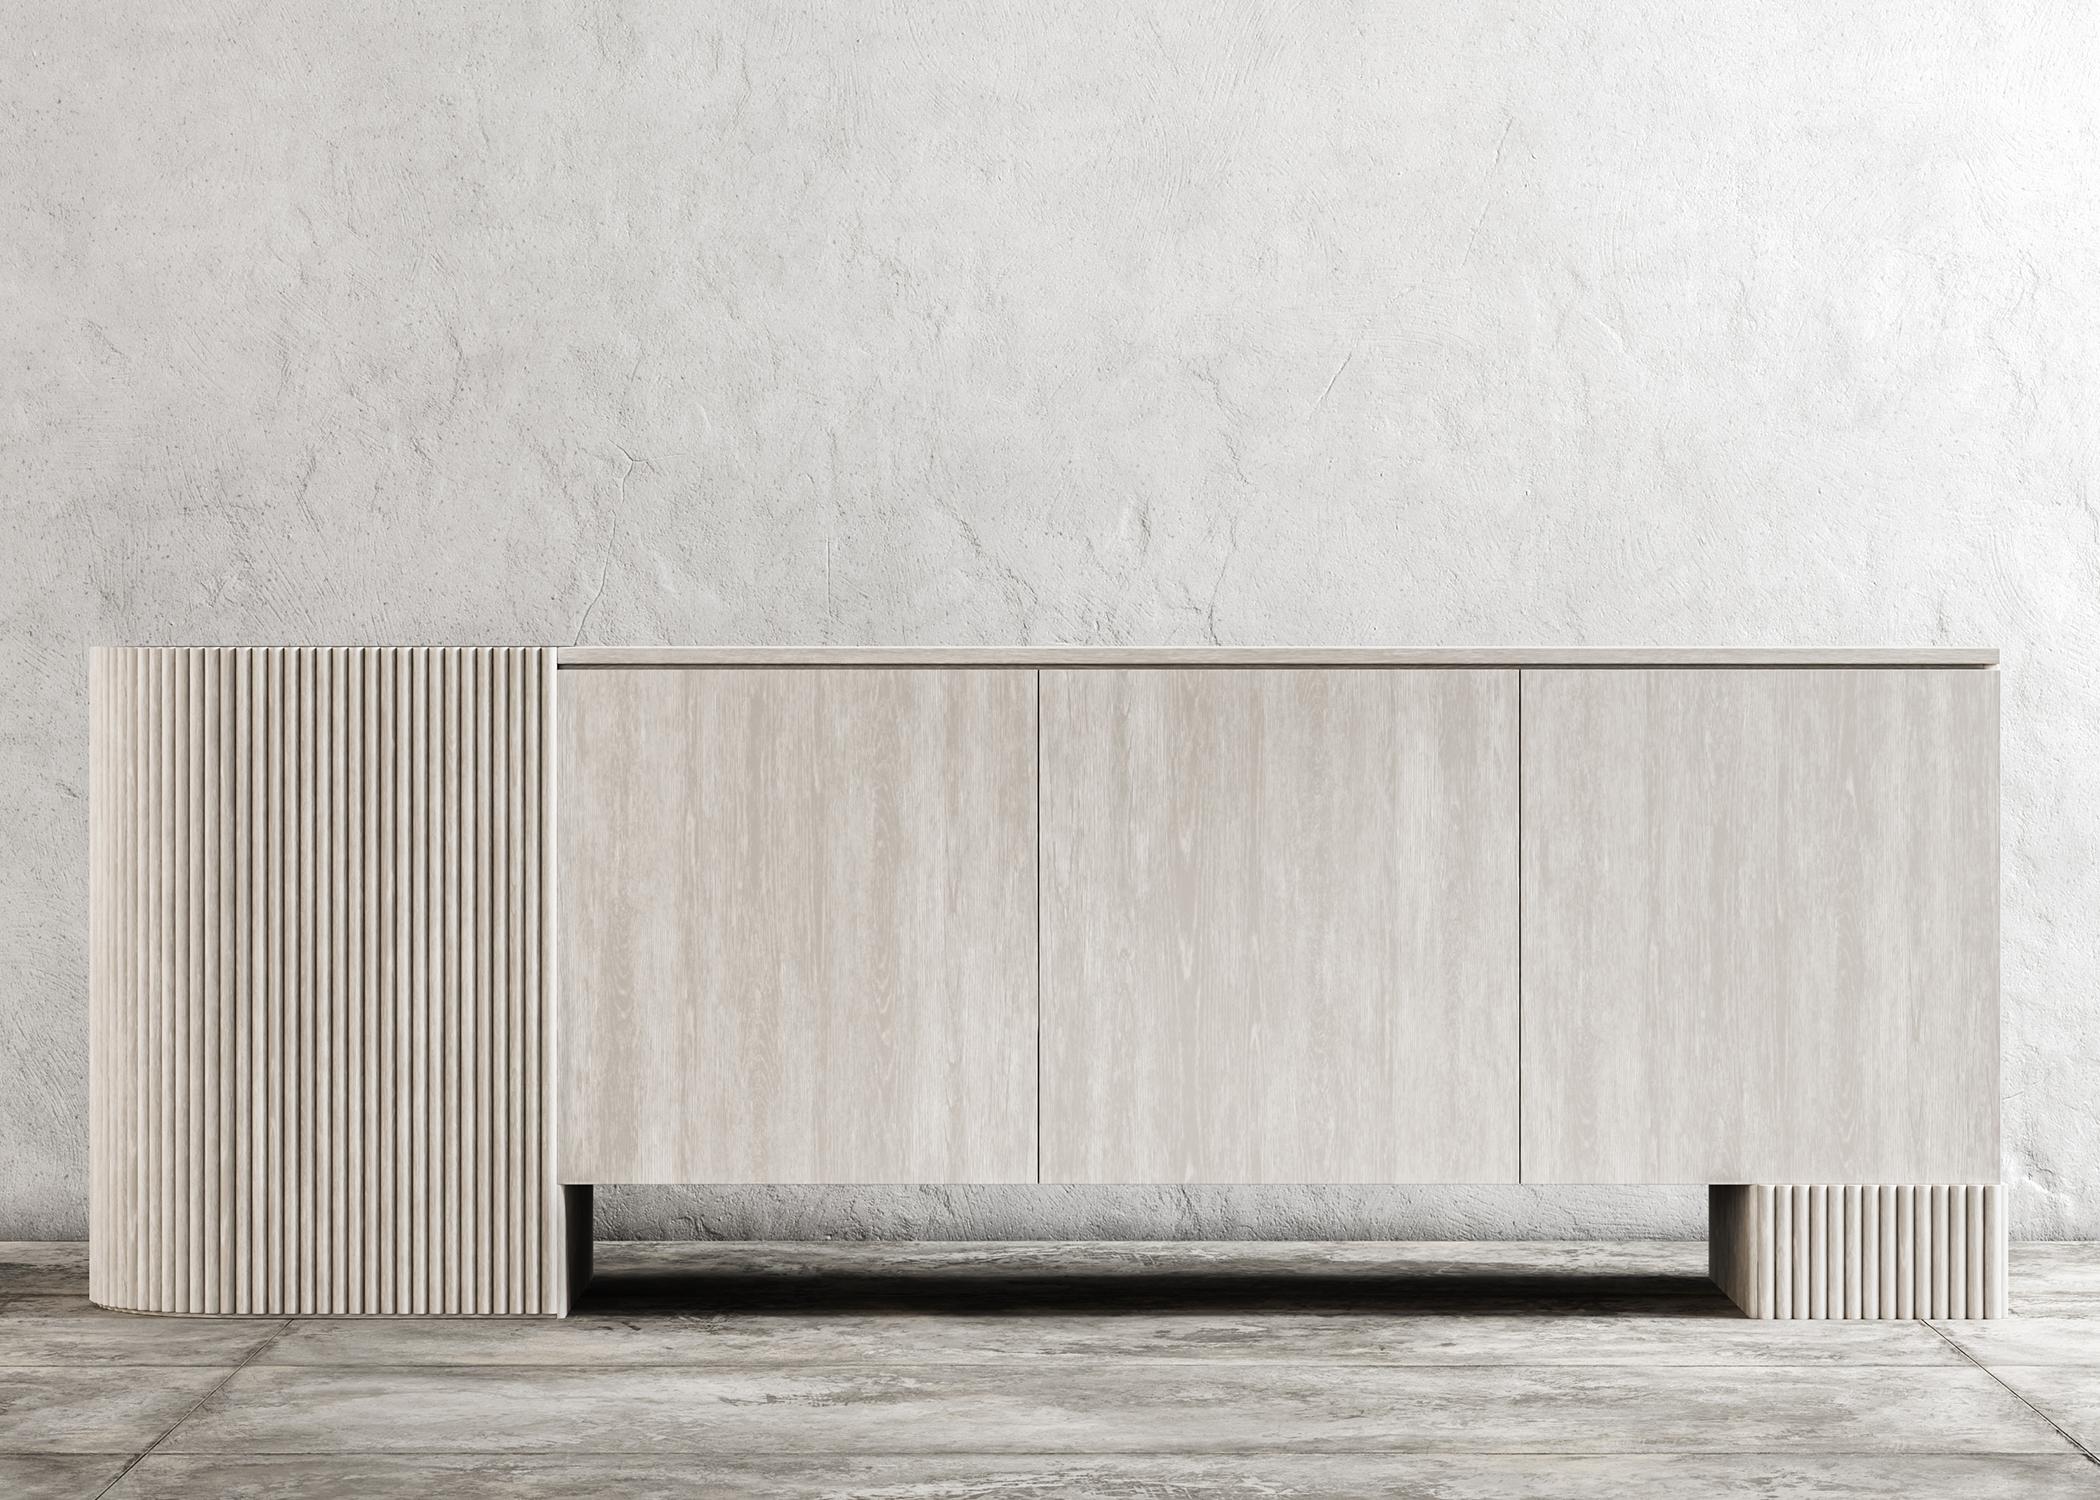 SWAY CREDENZA - Modern Design with Sandy Oak + Matte Lacquer

The Sway Credenza is a sleek and modern piece of furniture that is perfect for any contemporary living space. Crafted from high-quality Sandy Oak wood and finished with a clear matte